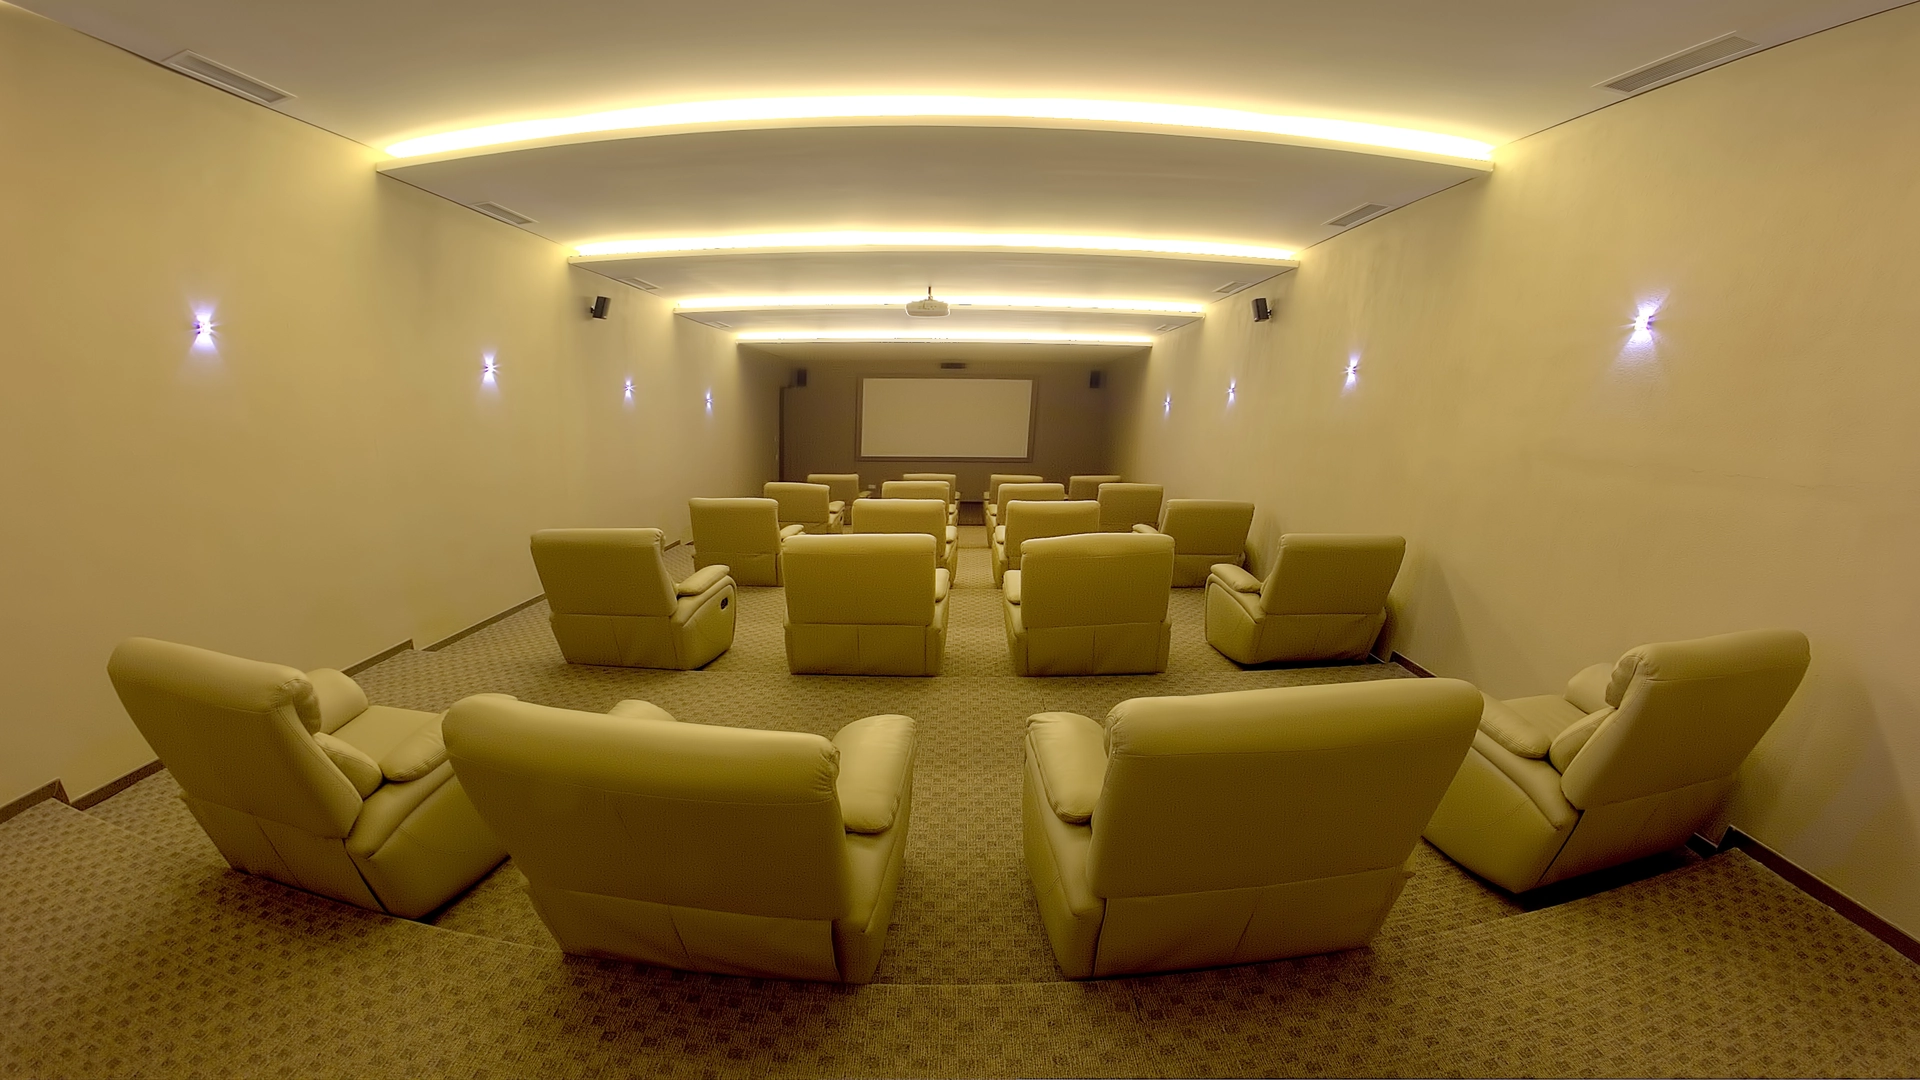 Transform Your Basement into a cozy Home Theater